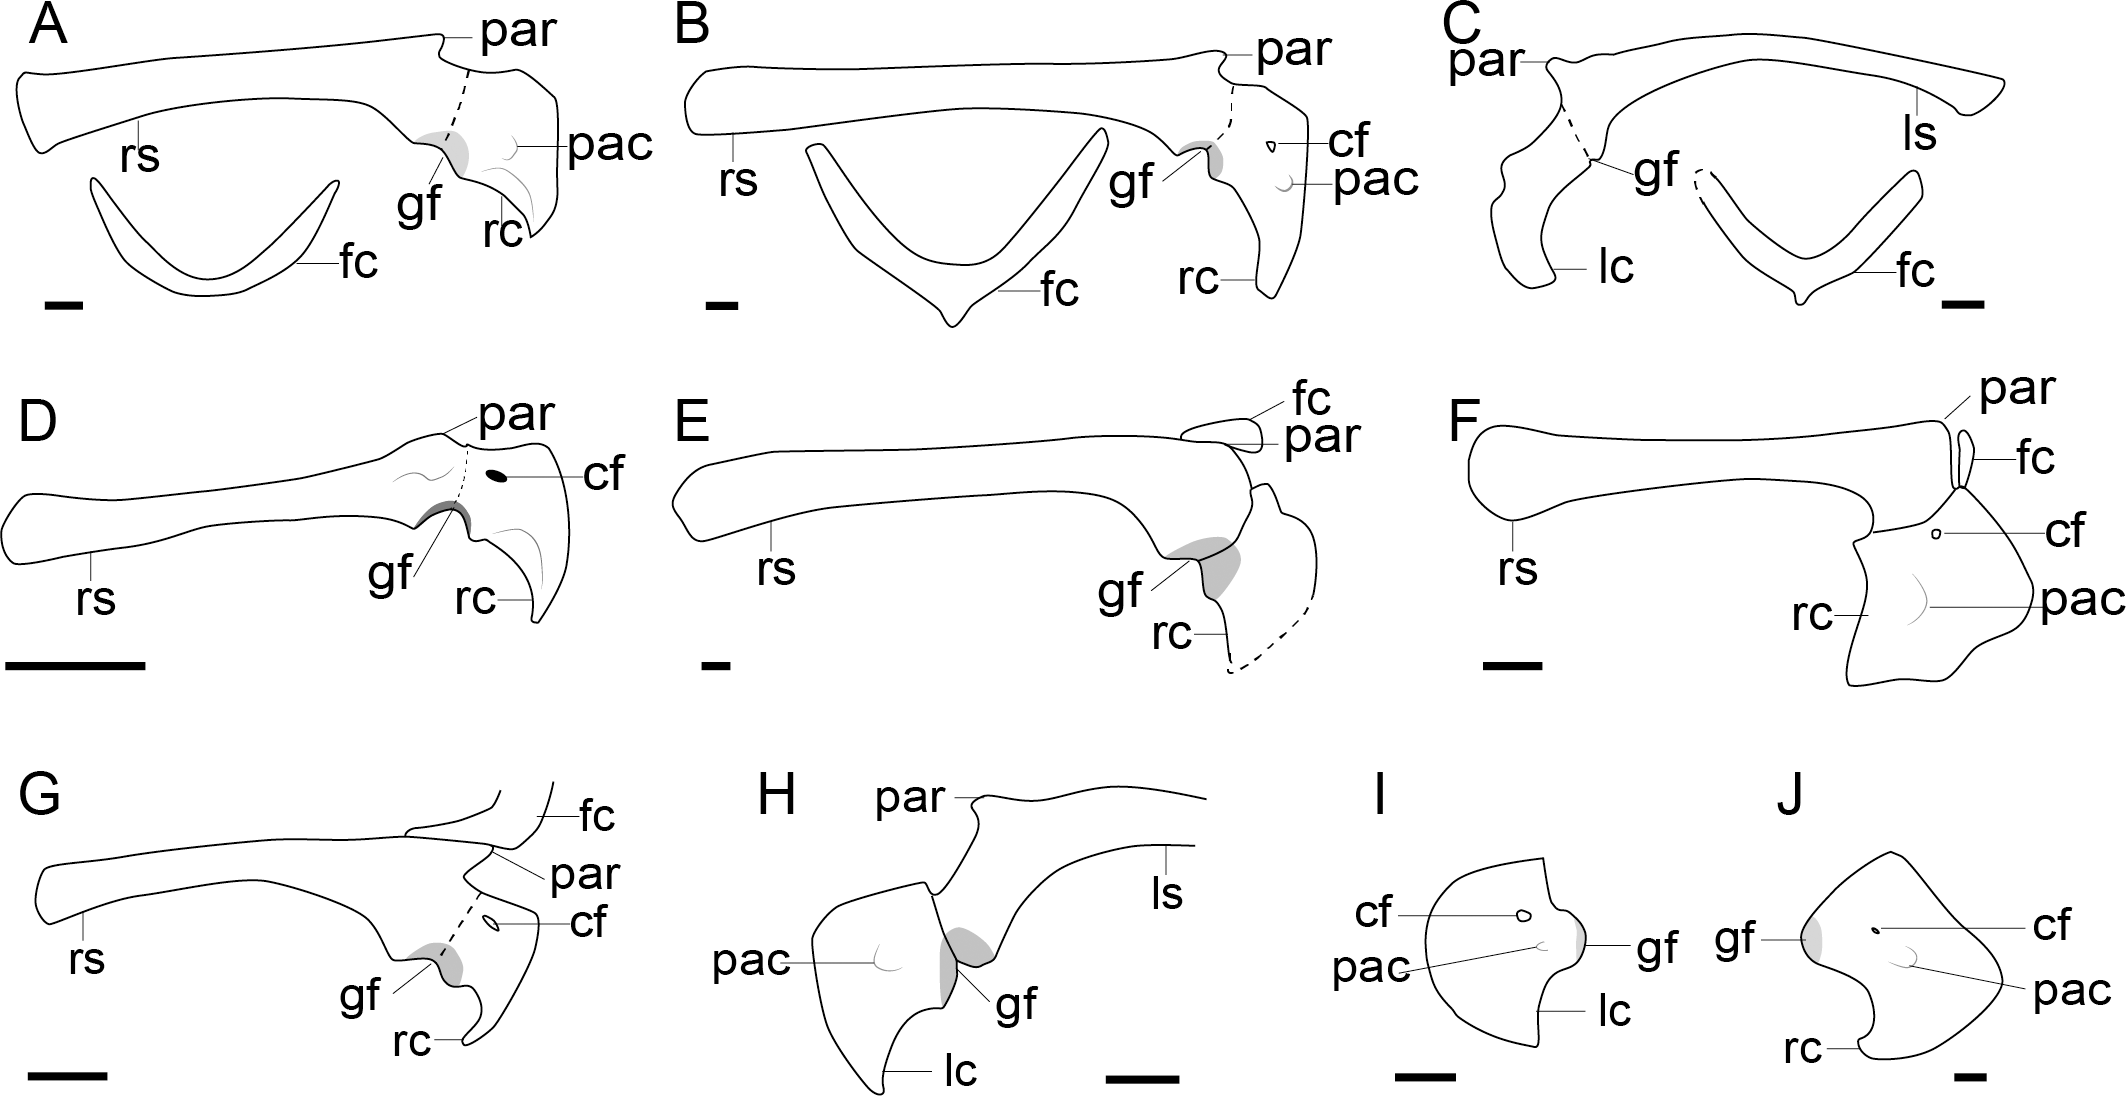 Transformation of the pectoral girdle in pennaraptorans: critical steps in  the formation of the modern avian shoulder joint [PeerJ]